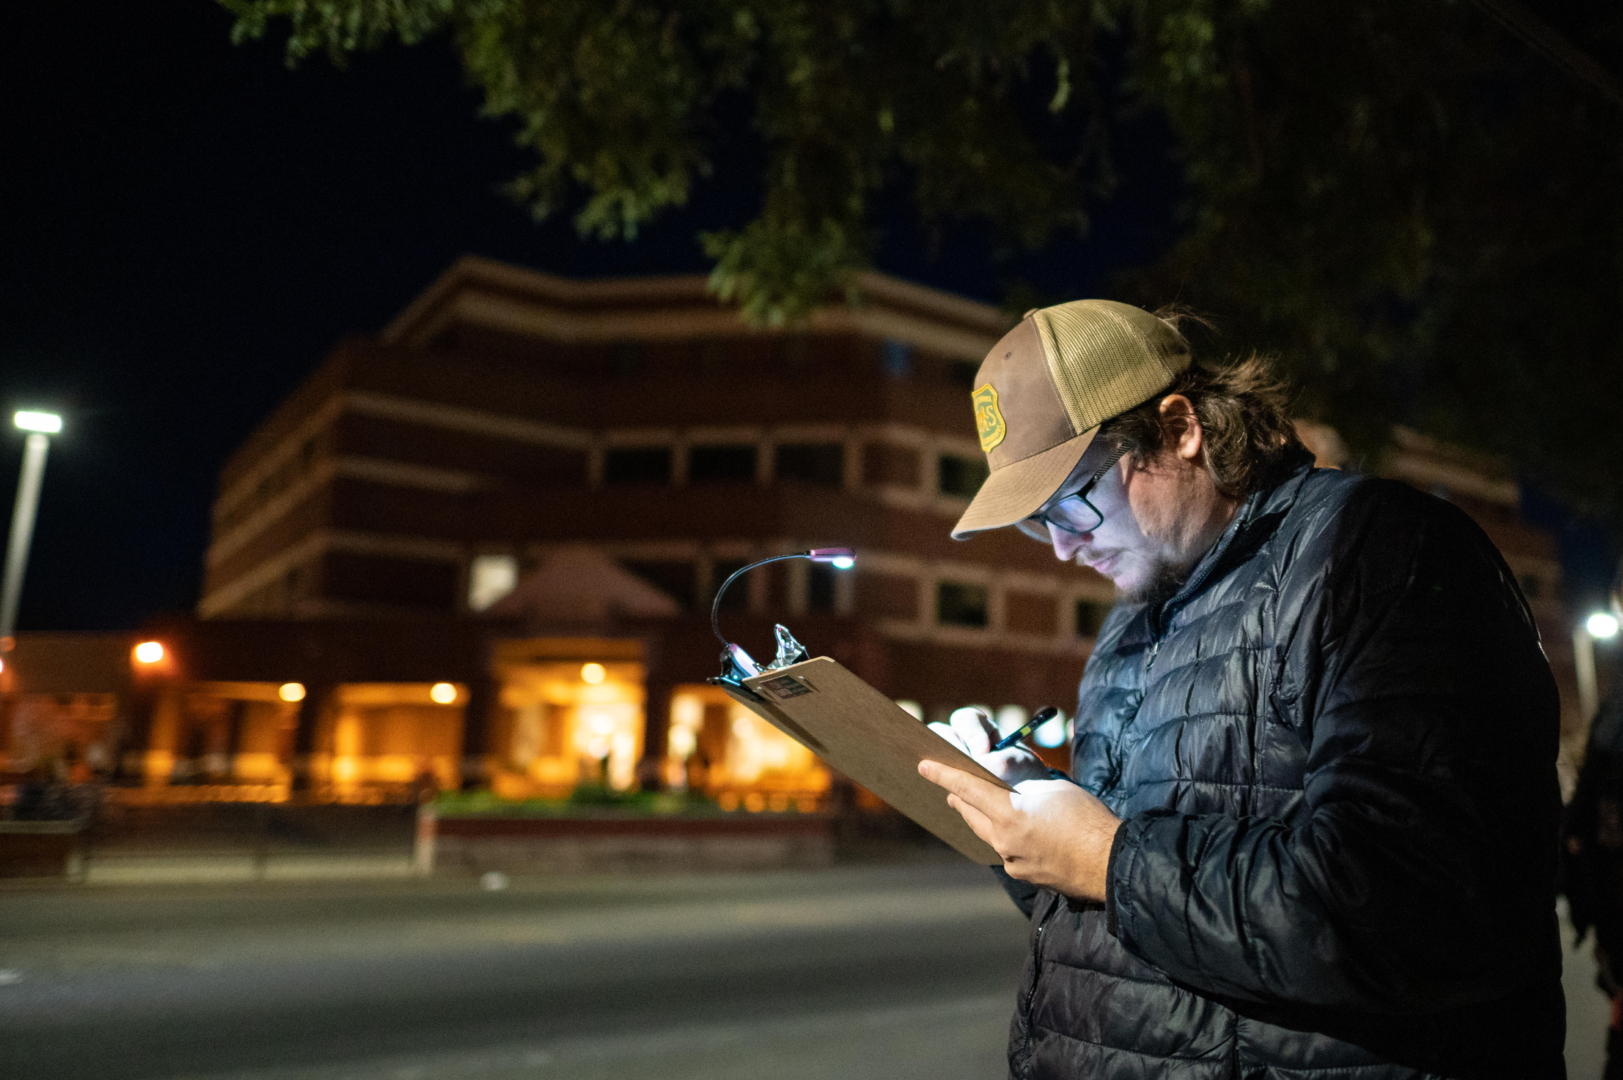 Jacob Winslow marks safety concerns using a clipboard with a clip-on light during the Moonlight Safety Walk.